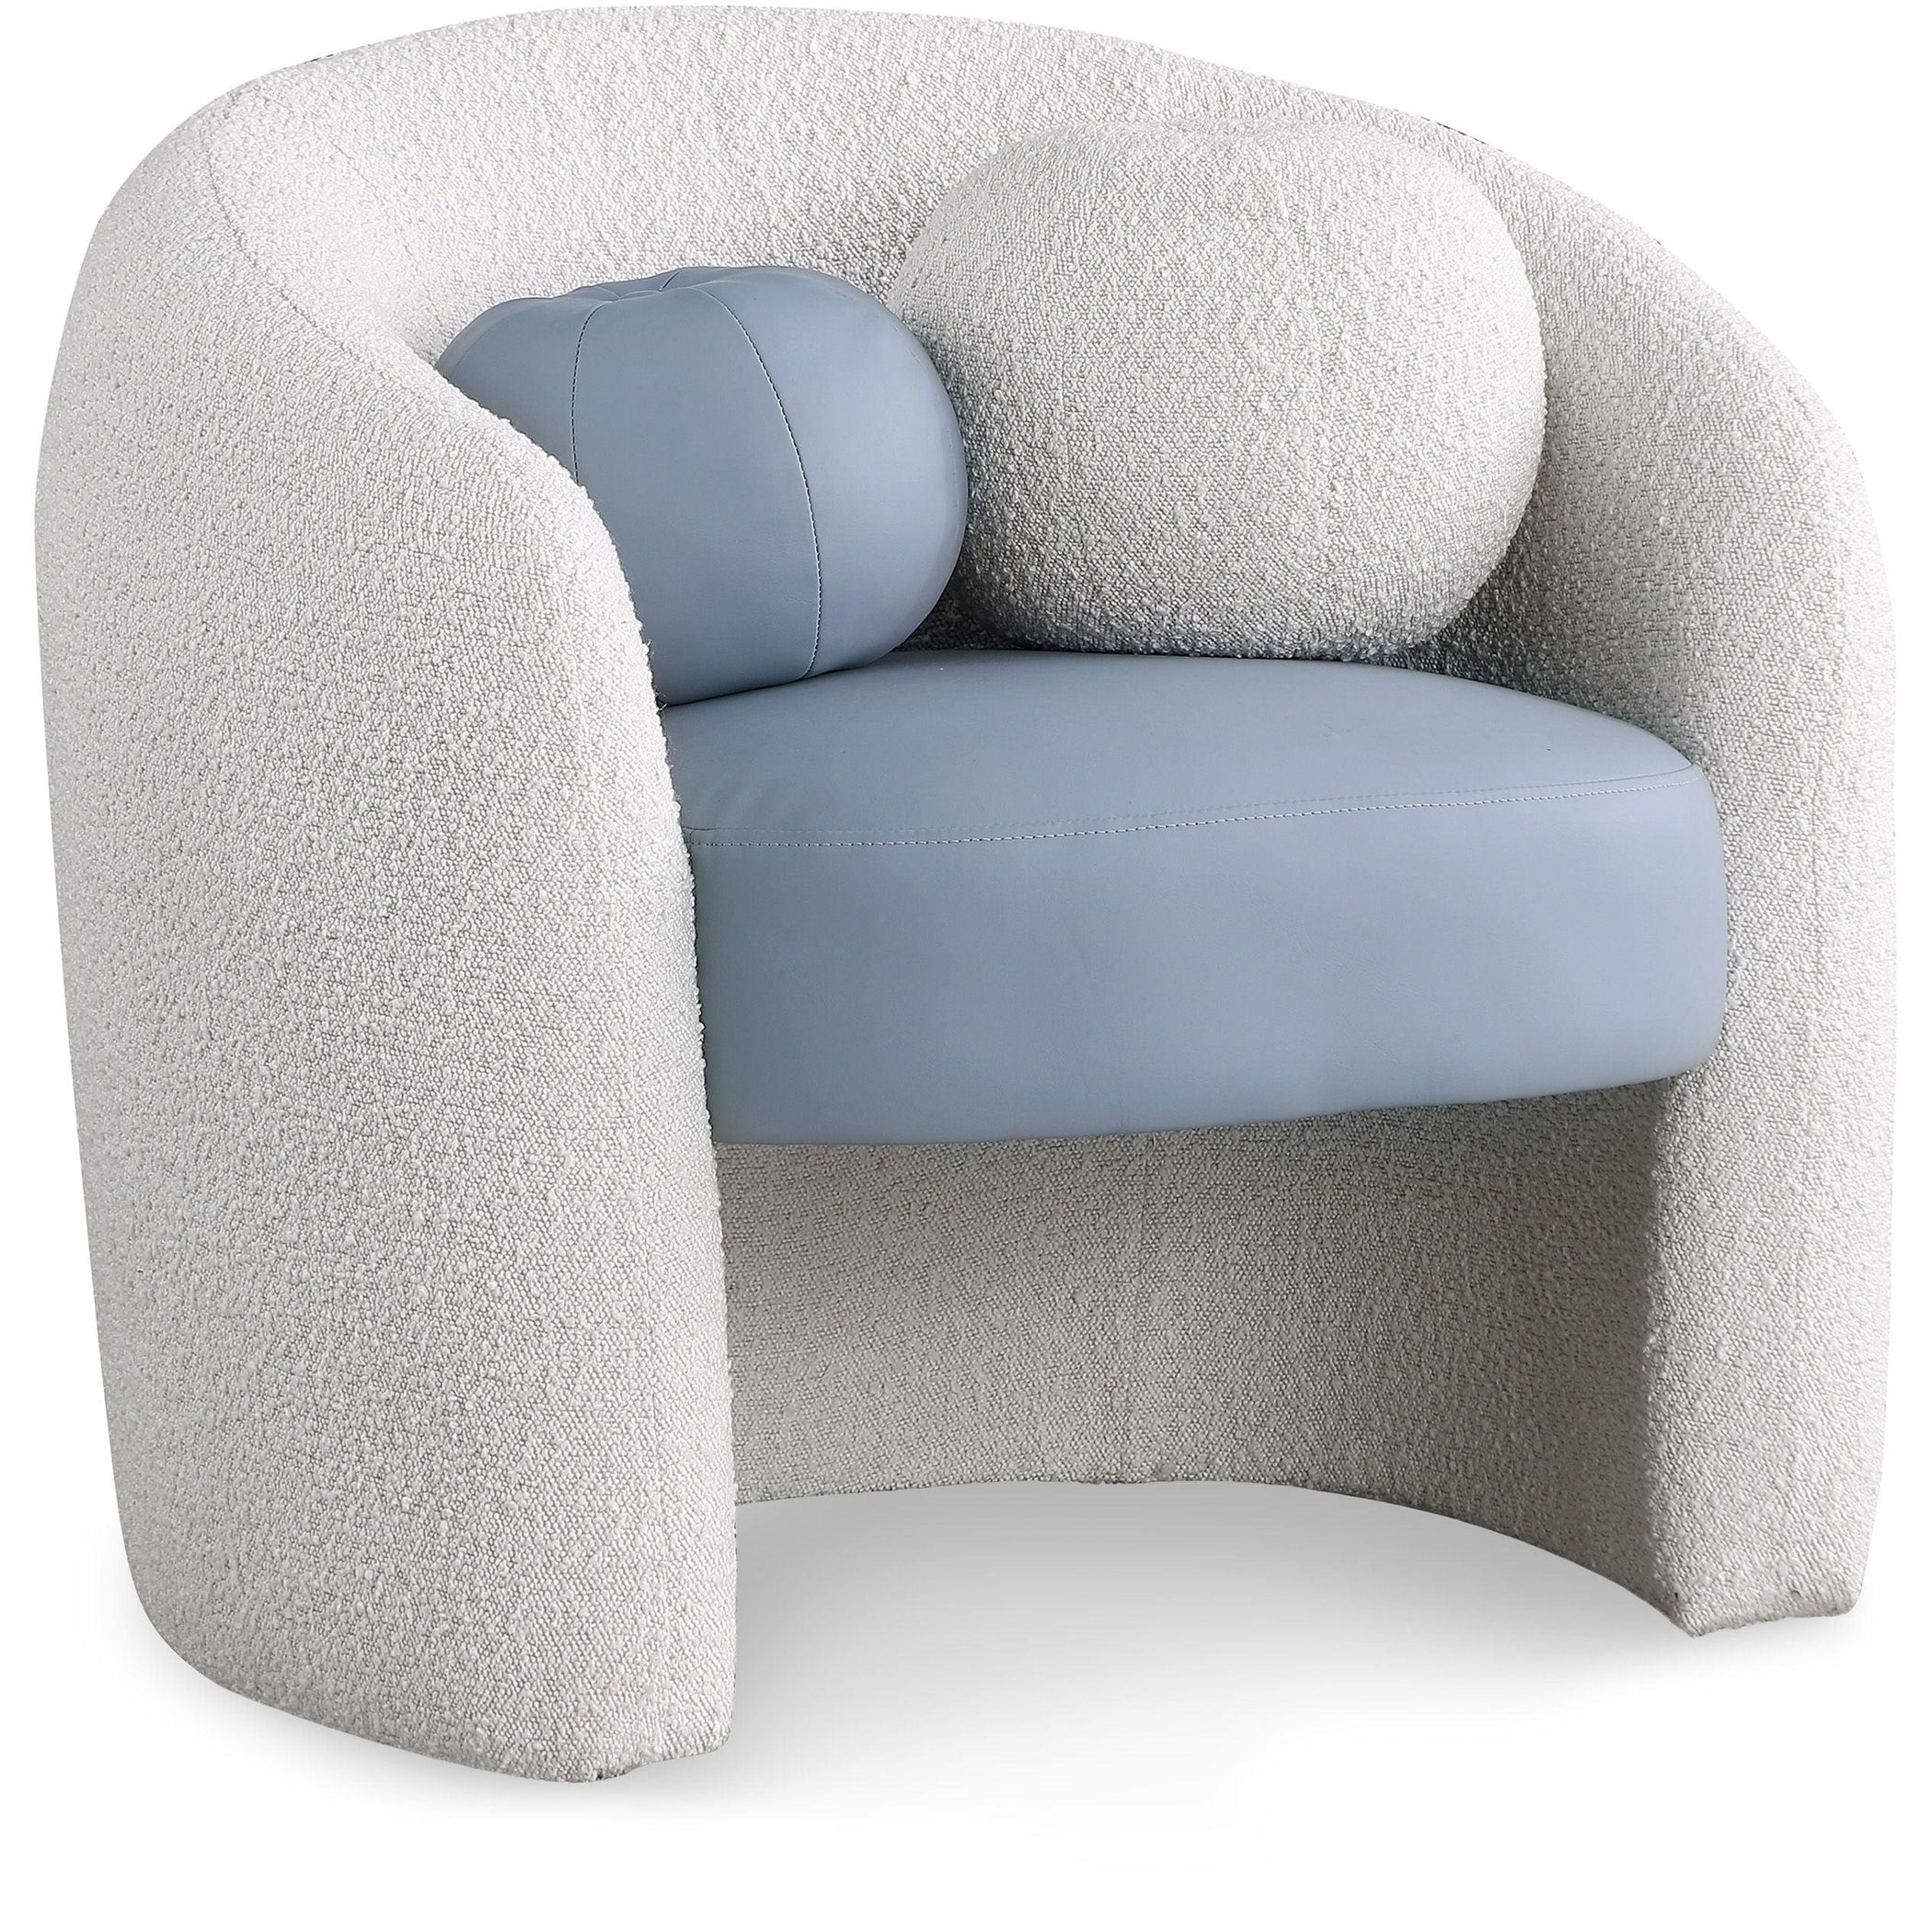 Meridian Furniture - Acadia - Accent Chair - 5th Avenue Furniture